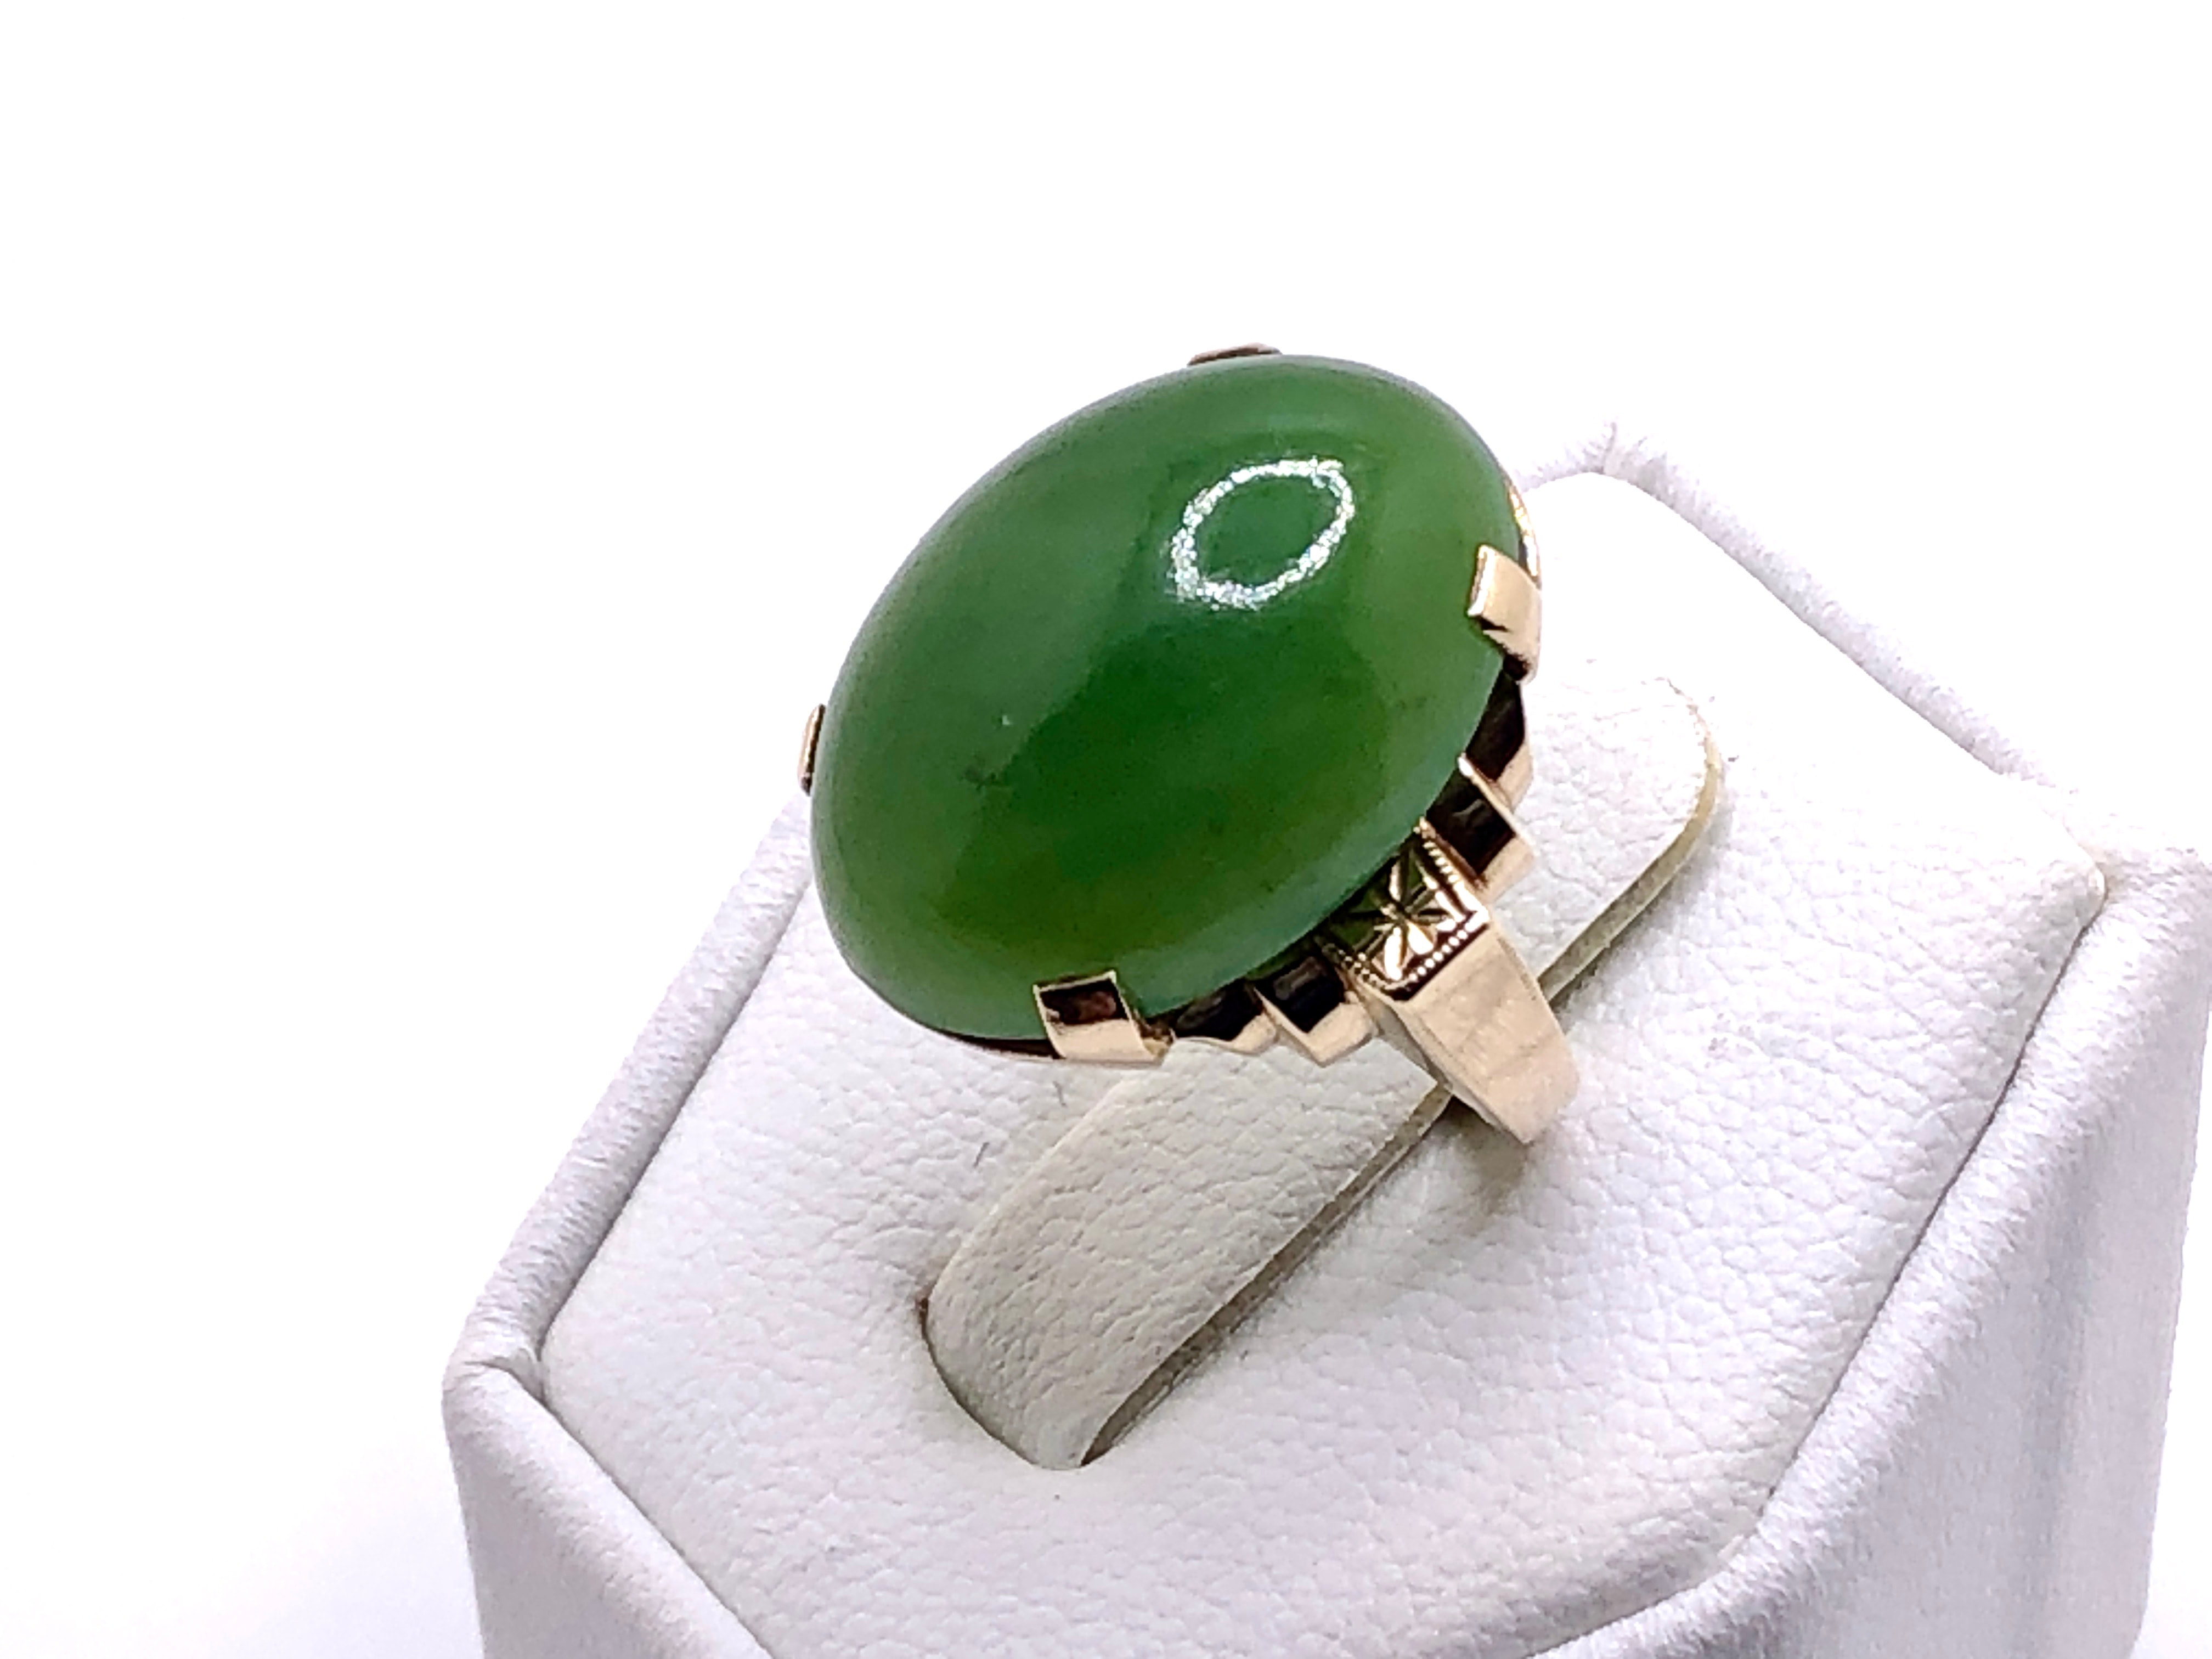 1 Gram Gold Forming - Green Stone Finely Detailed Design Ring For Men -  Style A734 at Rs 2500.00 | Gold Rings | ID: 25863739348